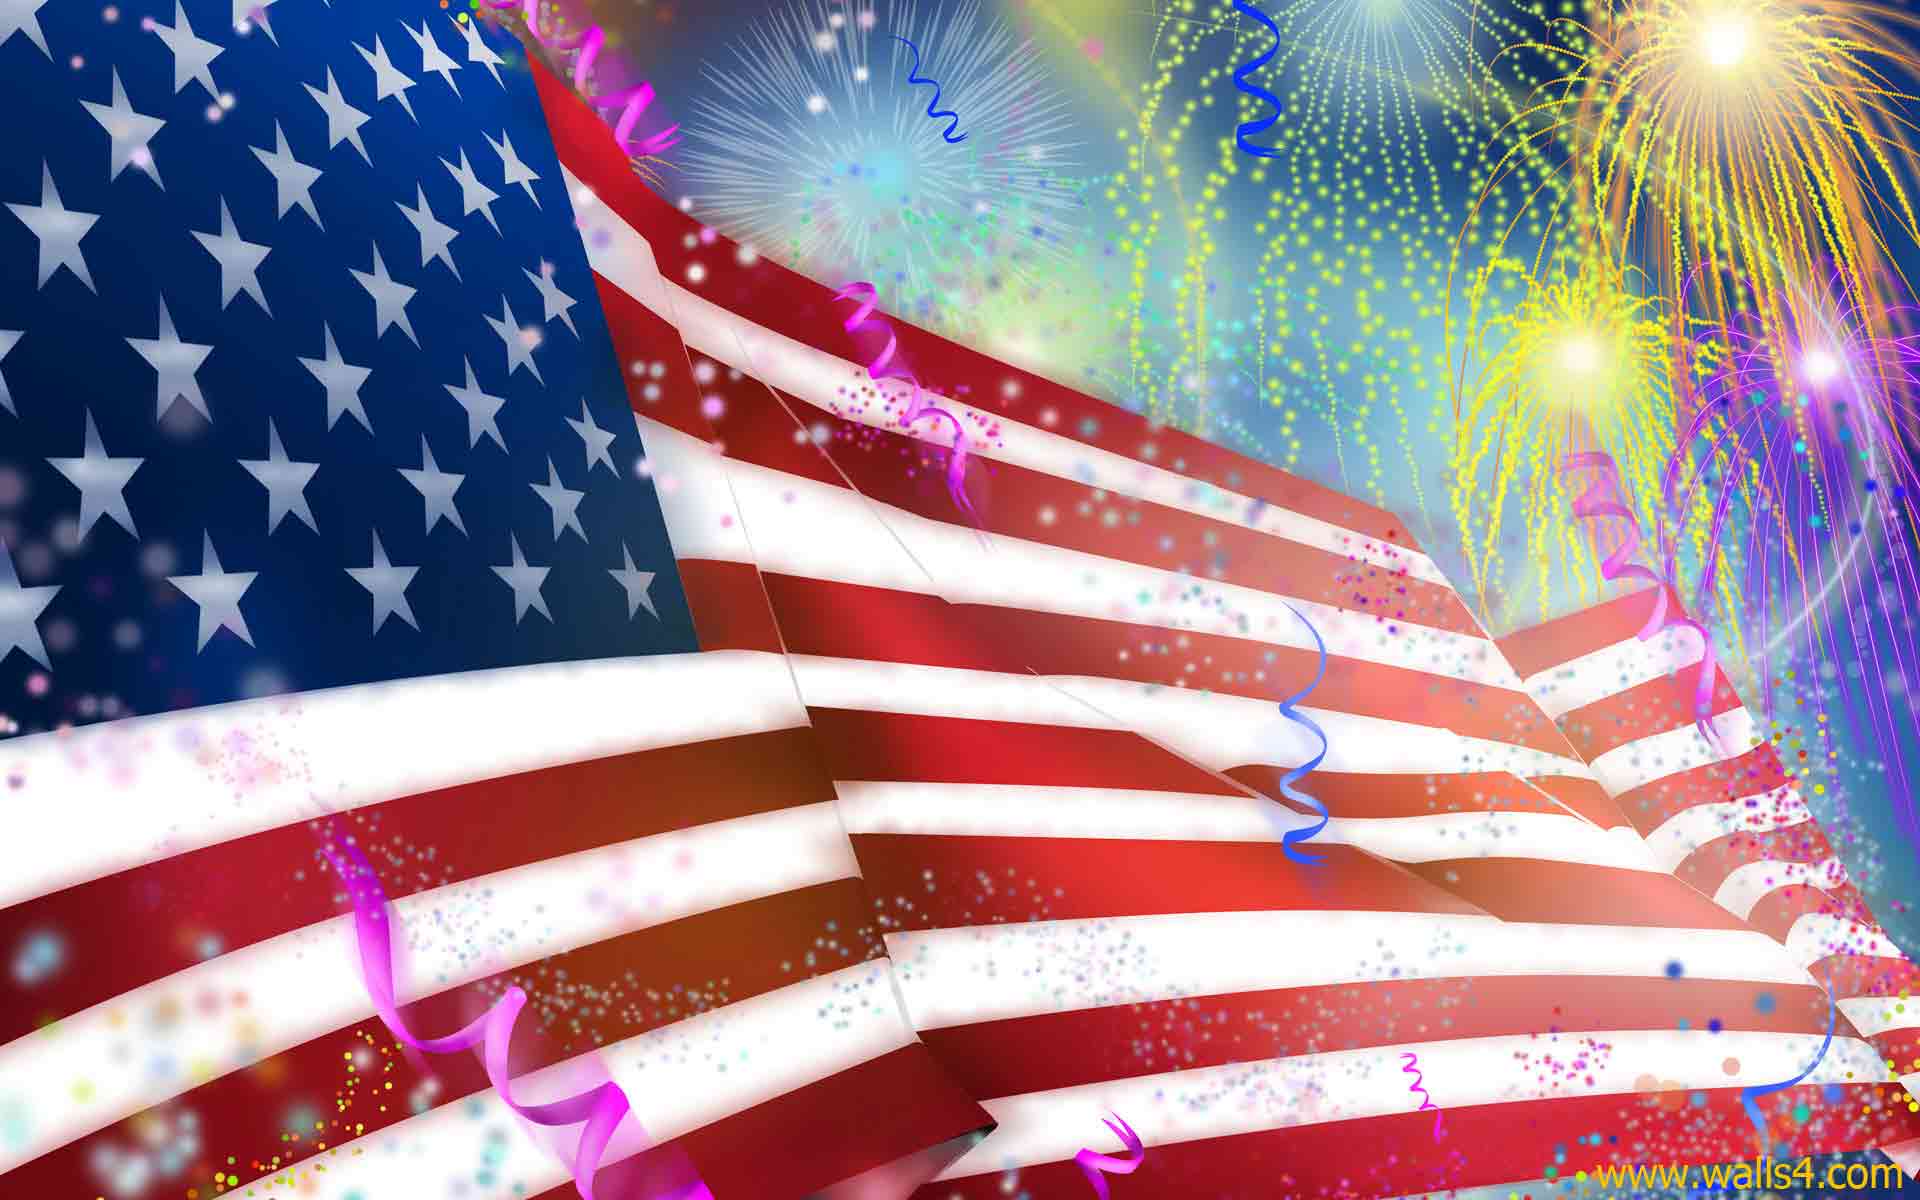 Free Wallpapers   USA flag Independence Day wallpaper